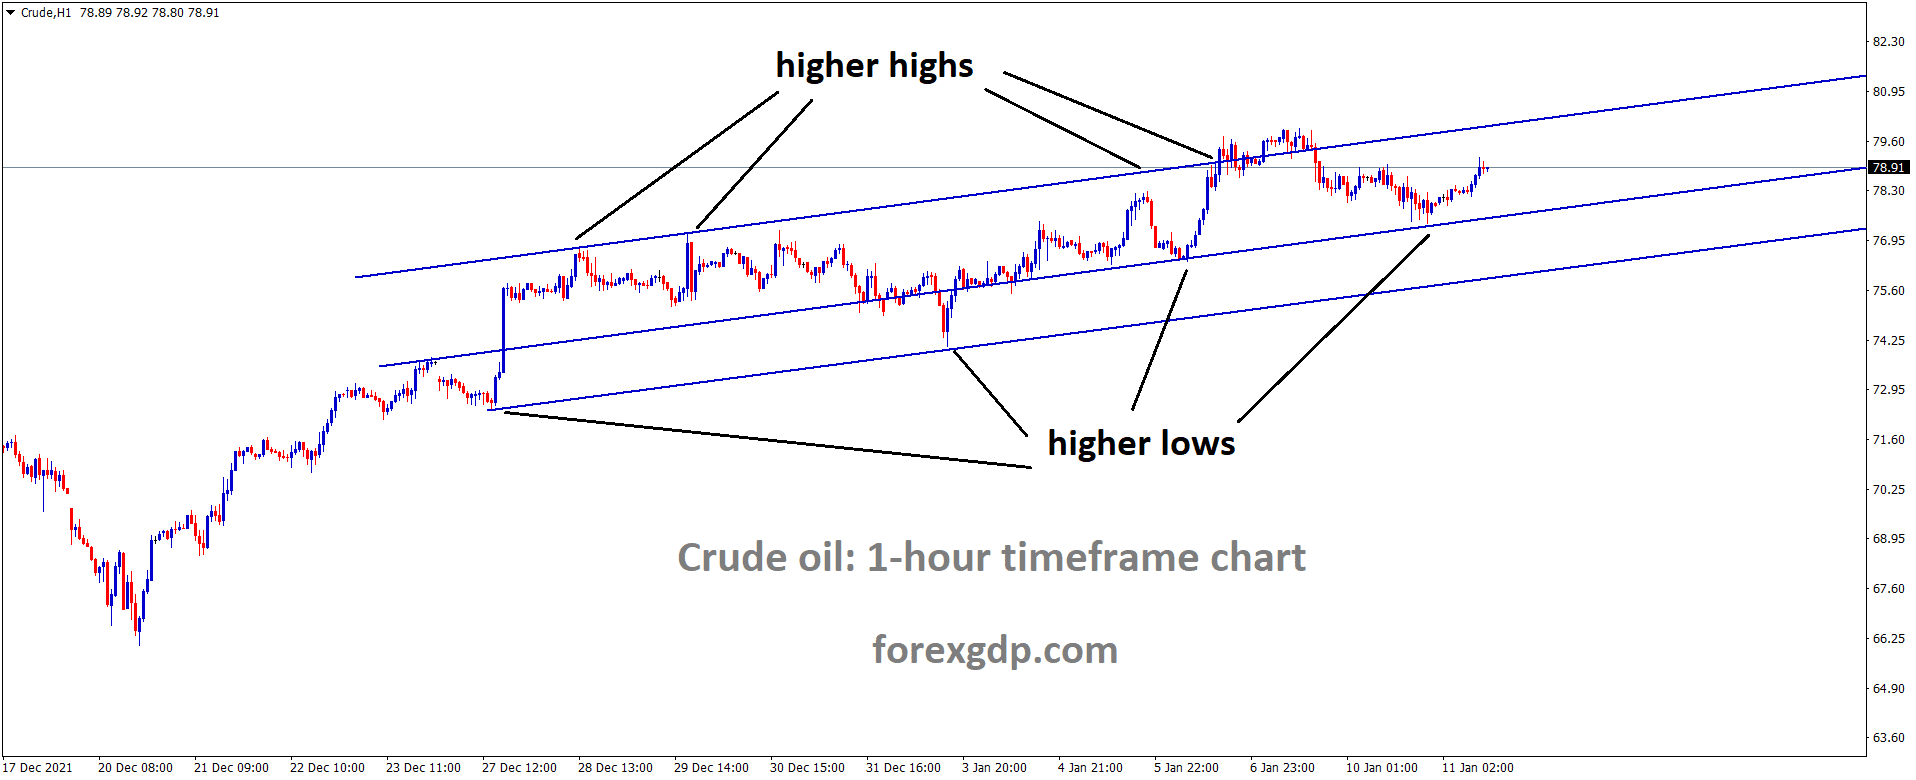 Crudeoil is moving in an Ascending channel and the market has rebounded from the higher low area of the channel